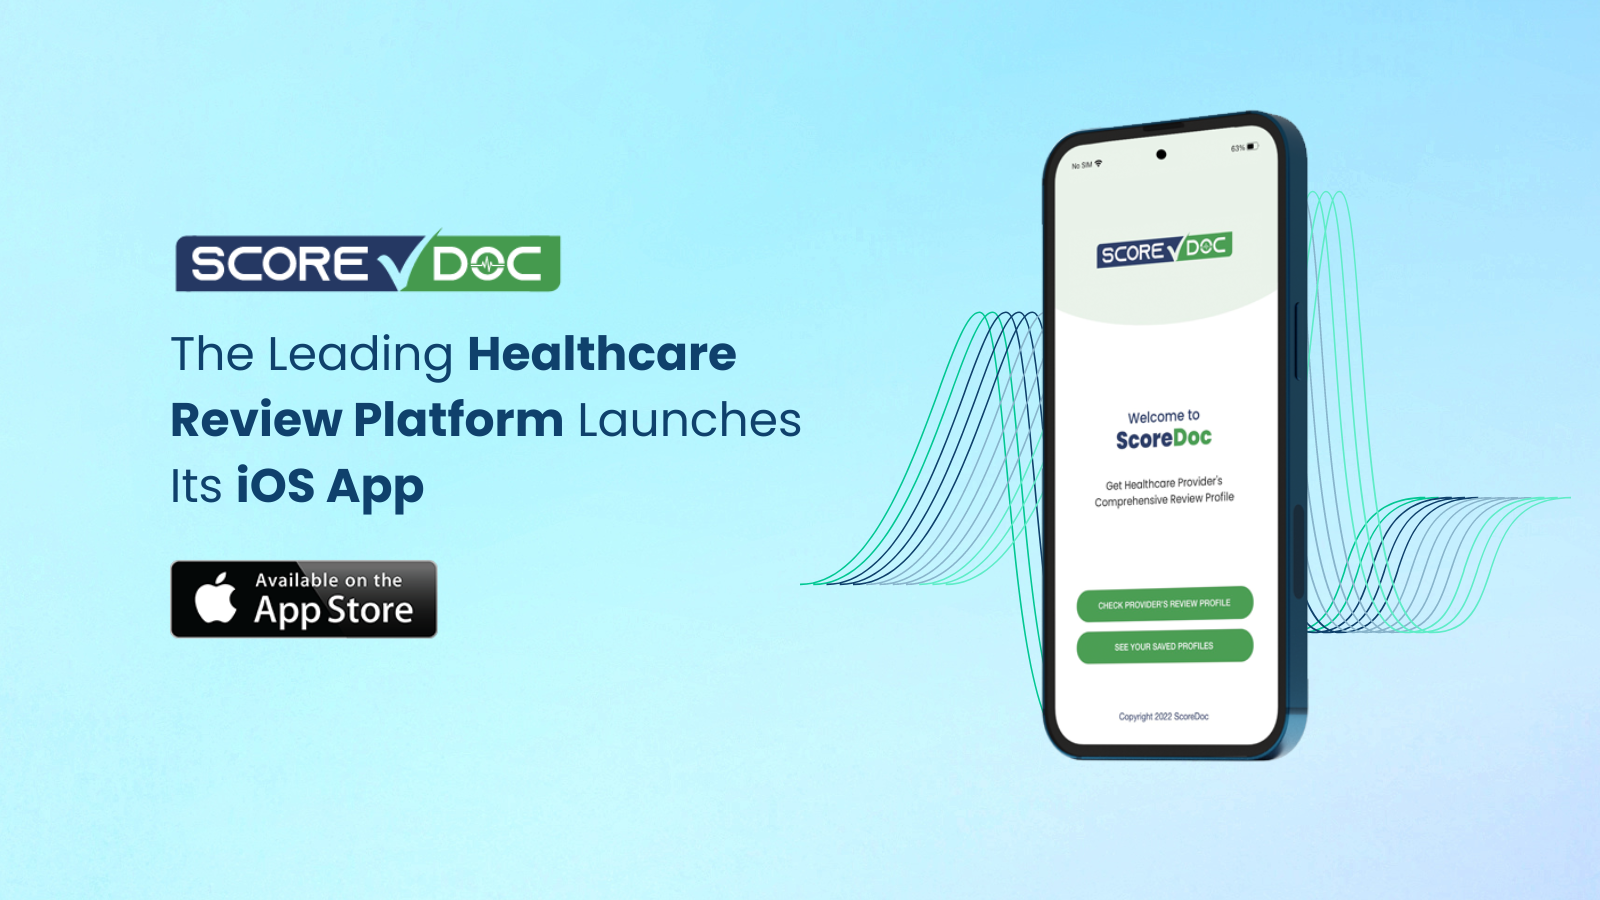 Healthcare Review Consolidator ScoreDoc Launches Its iOS App